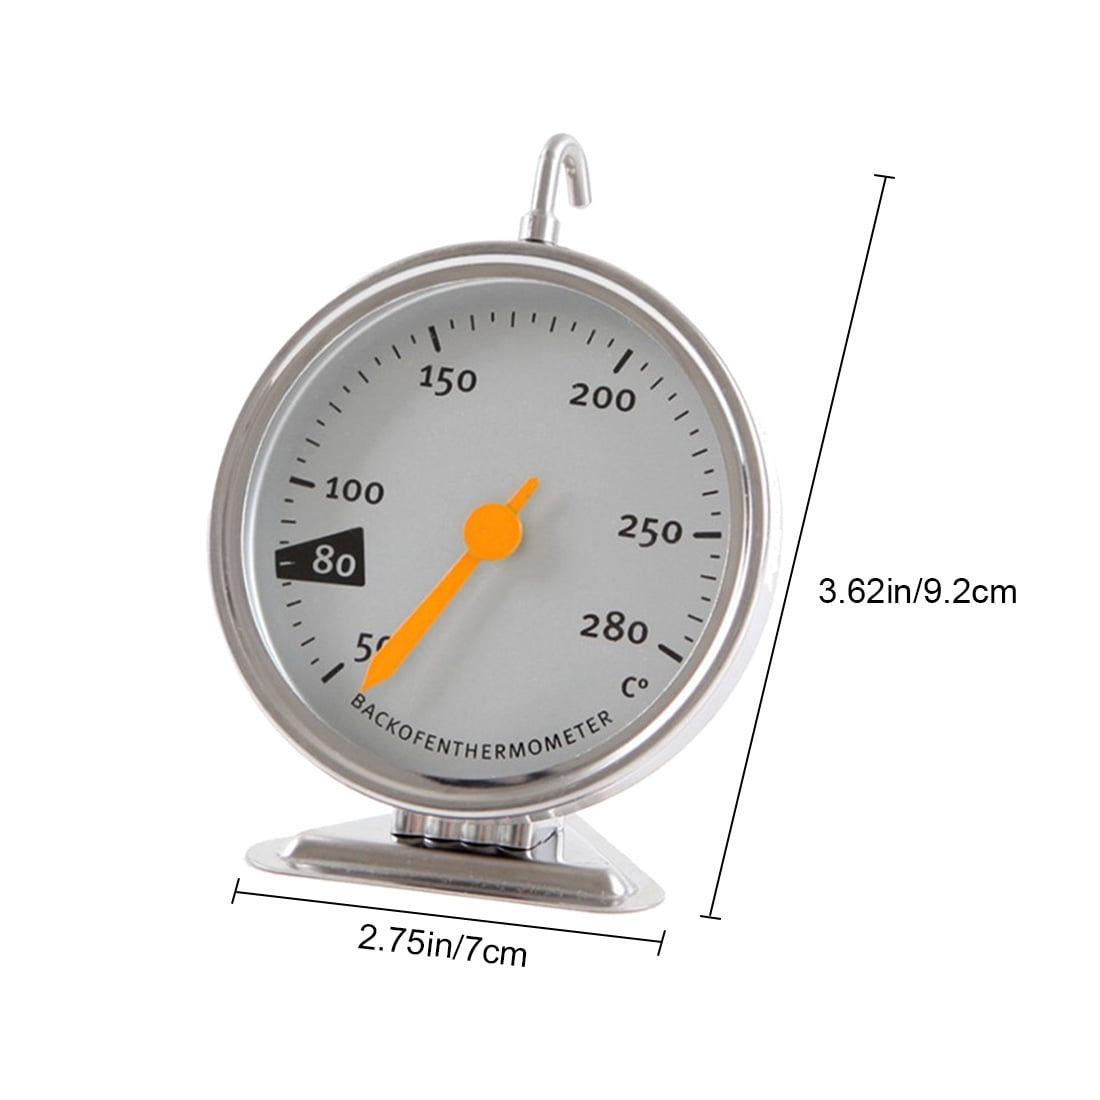 Uzinb Mechanical Baking Oven Thermometer Oven Special Bakeware 50-280 ℃ 